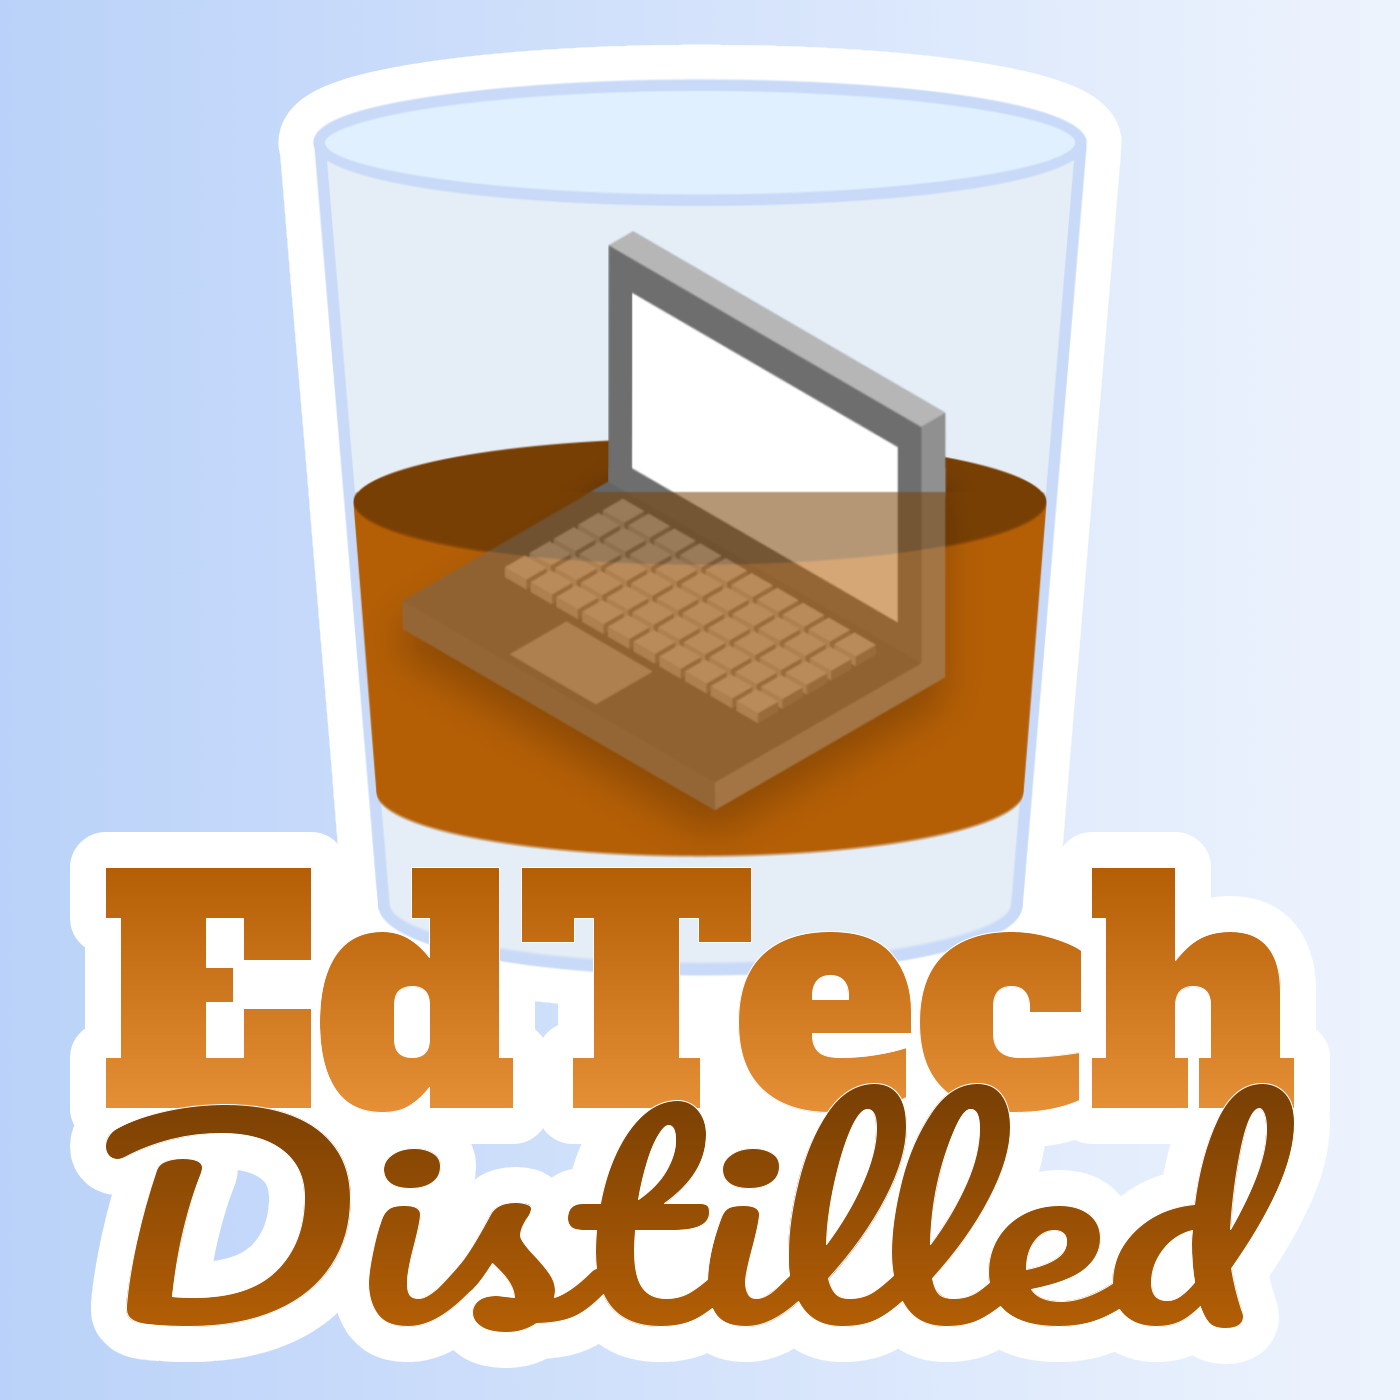 Brian Buffington and Bucky Bush talk EdTech, GIFS, Gifts for Non-Techies, and Gifts for Techies - 330